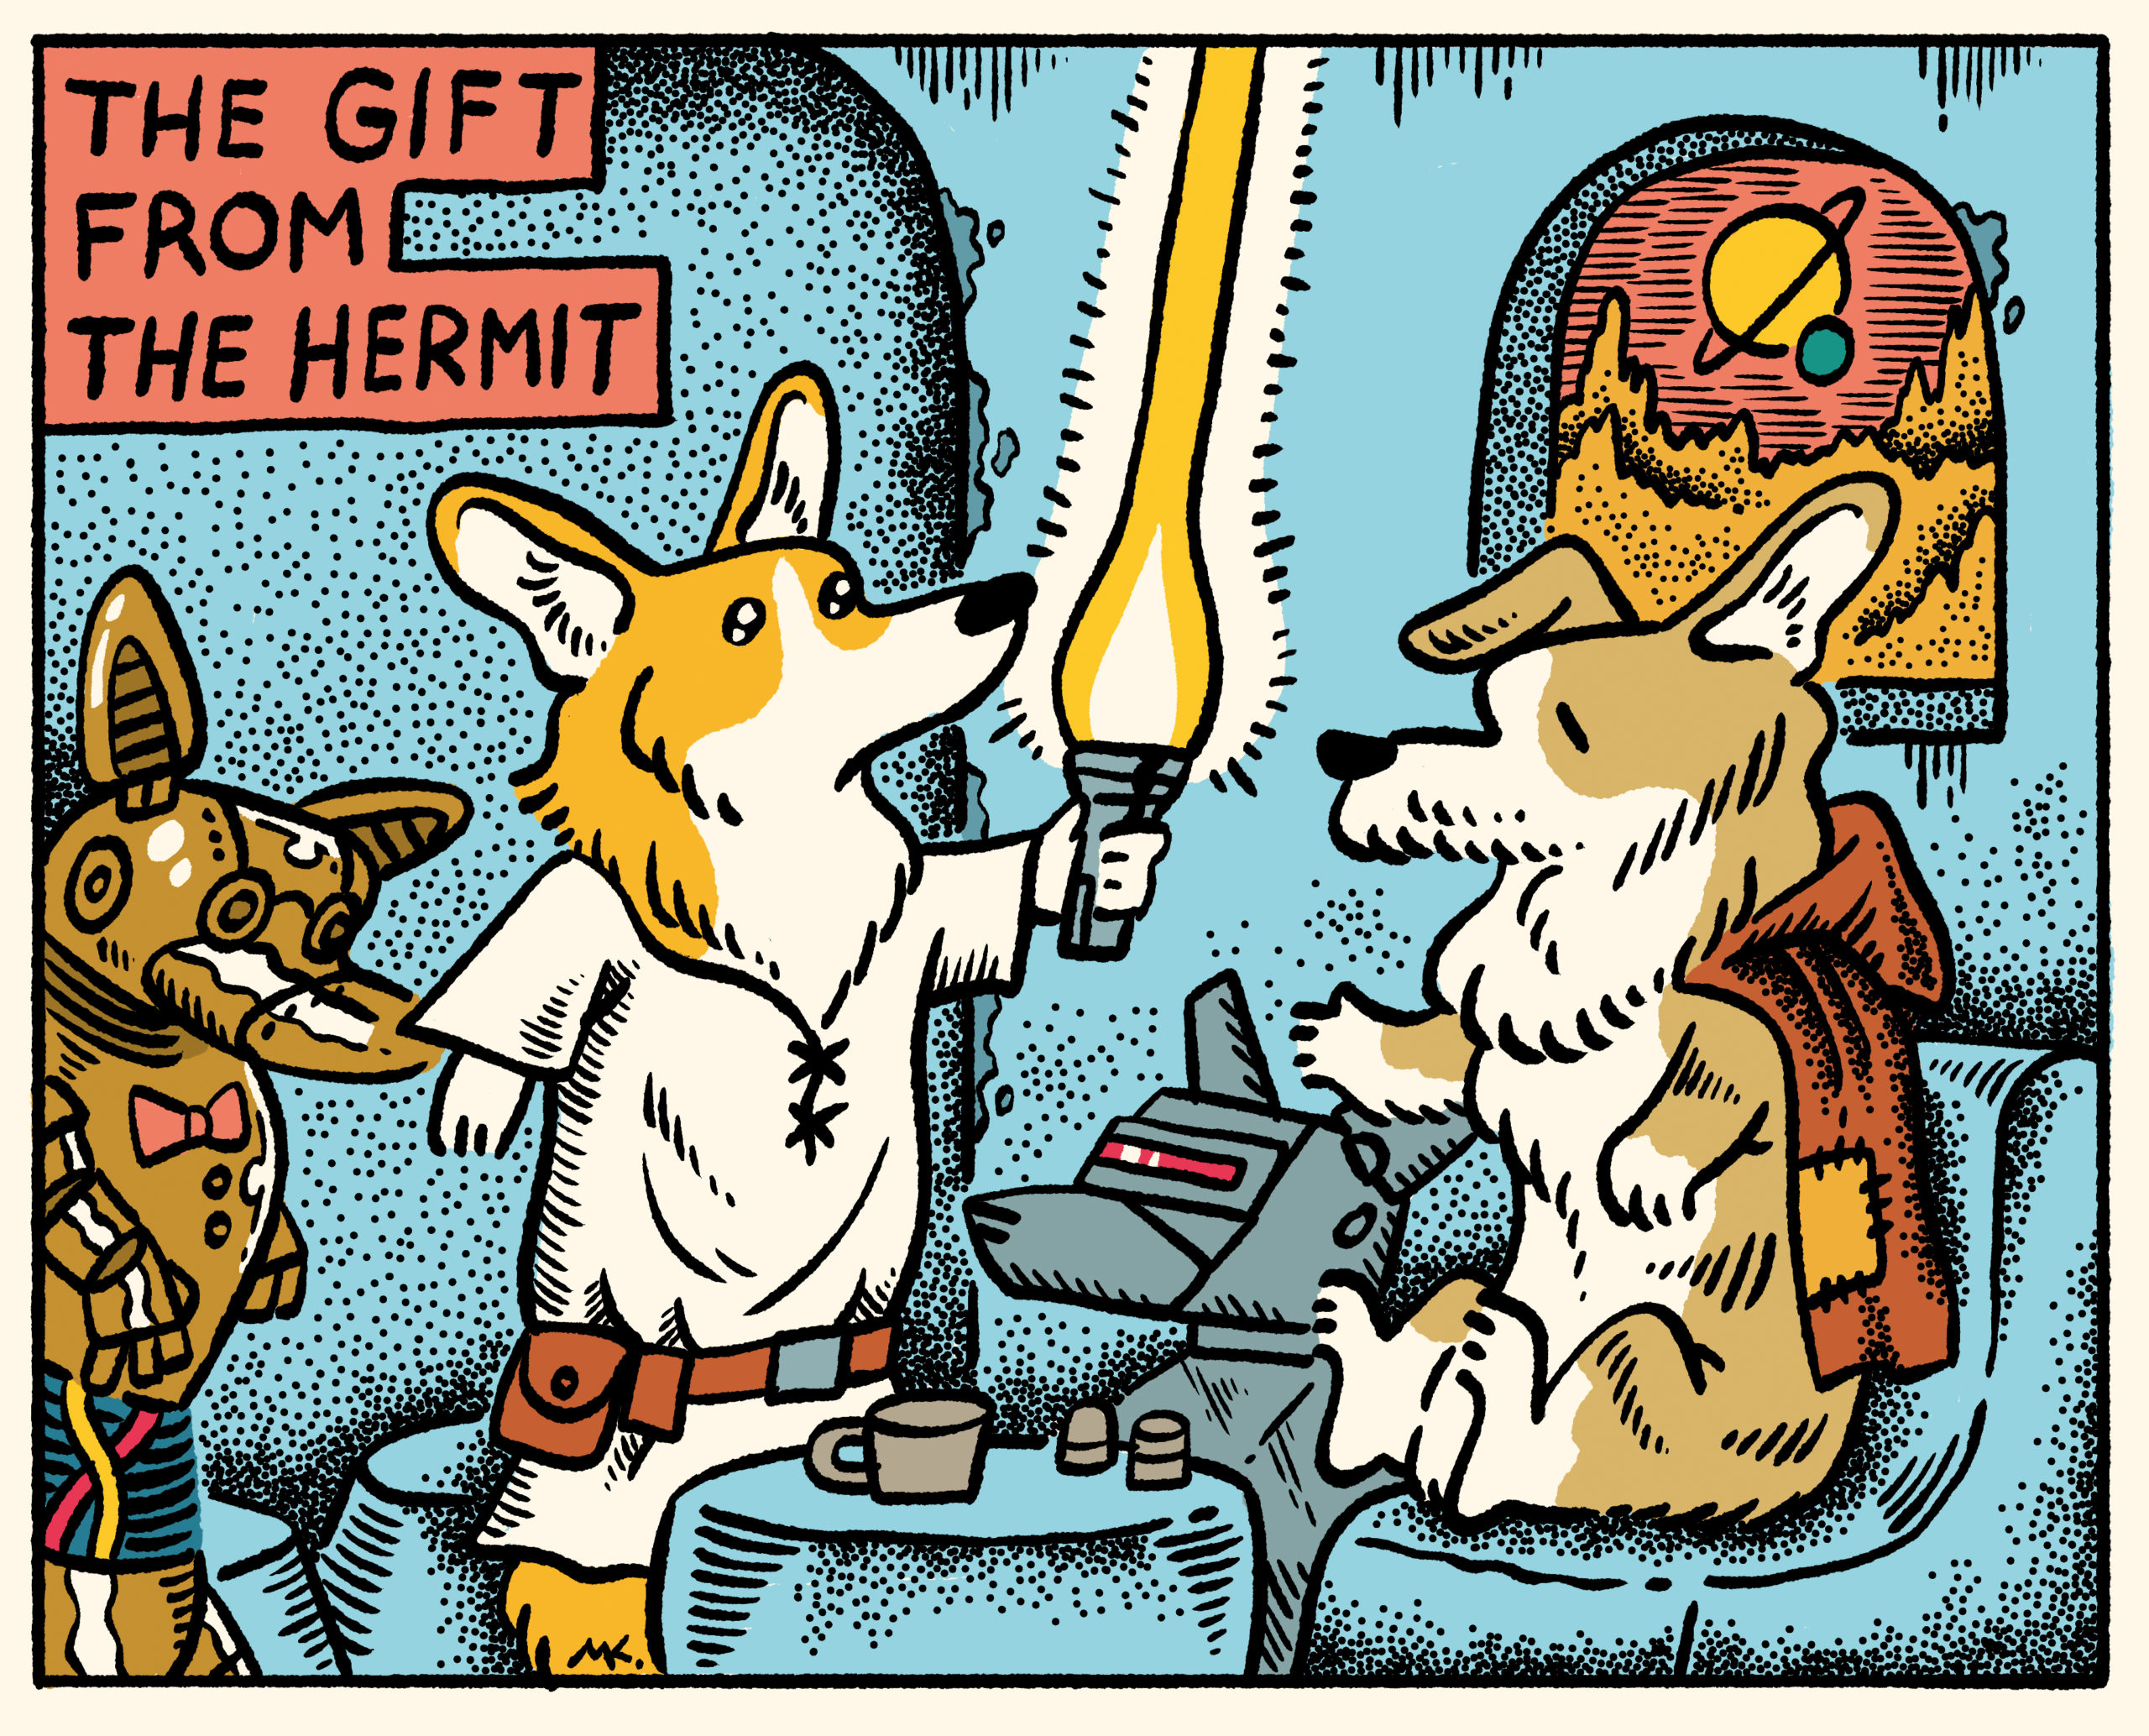 The Gift from The Hermit